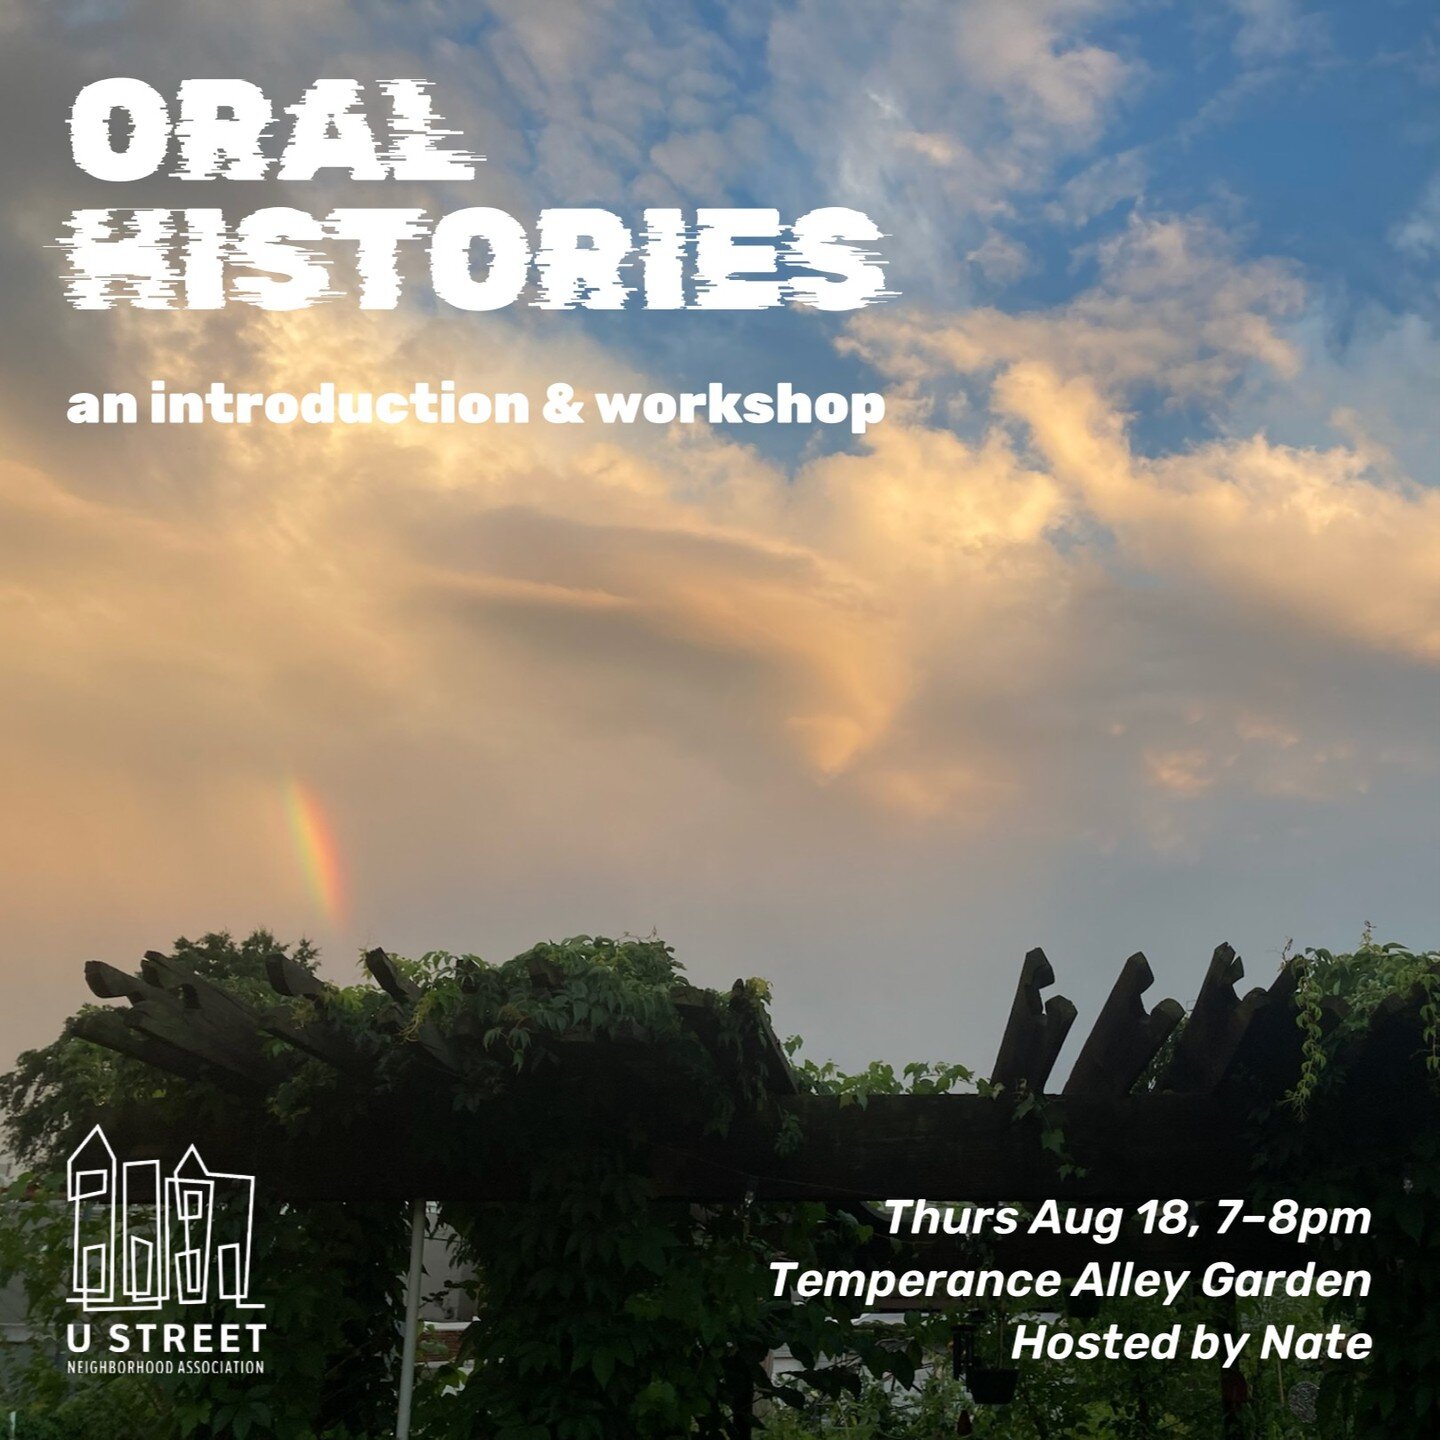 Have you ever been curious about oral histories? We'll spend the first 20 mins of this workshop talking about what oral histories are and how to approach them. For the second half, we'll collect mini oral histories from each other, and discuss the pr